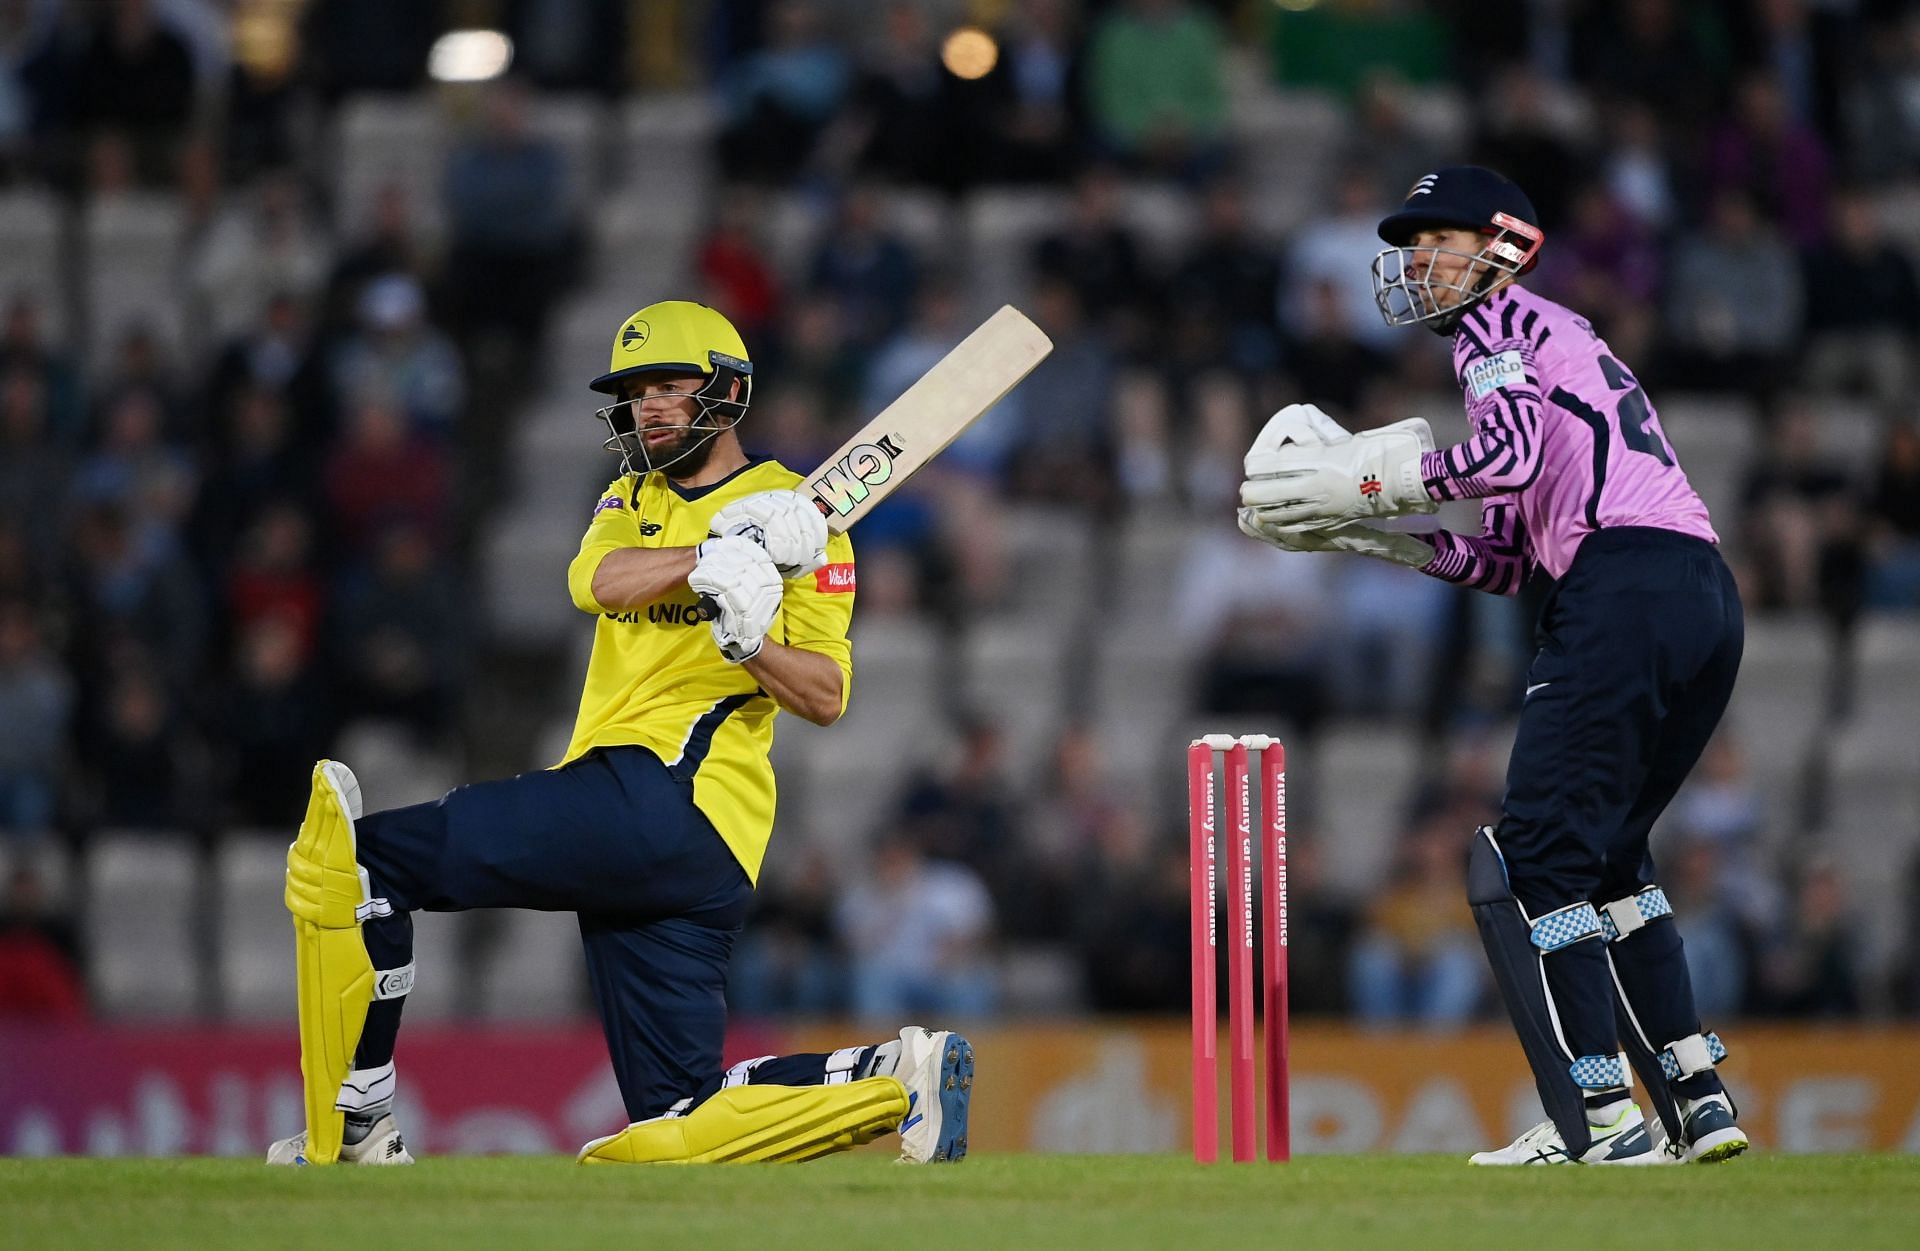 Vitality T20 Blast continues on Monday with a match at the Rose Bowl